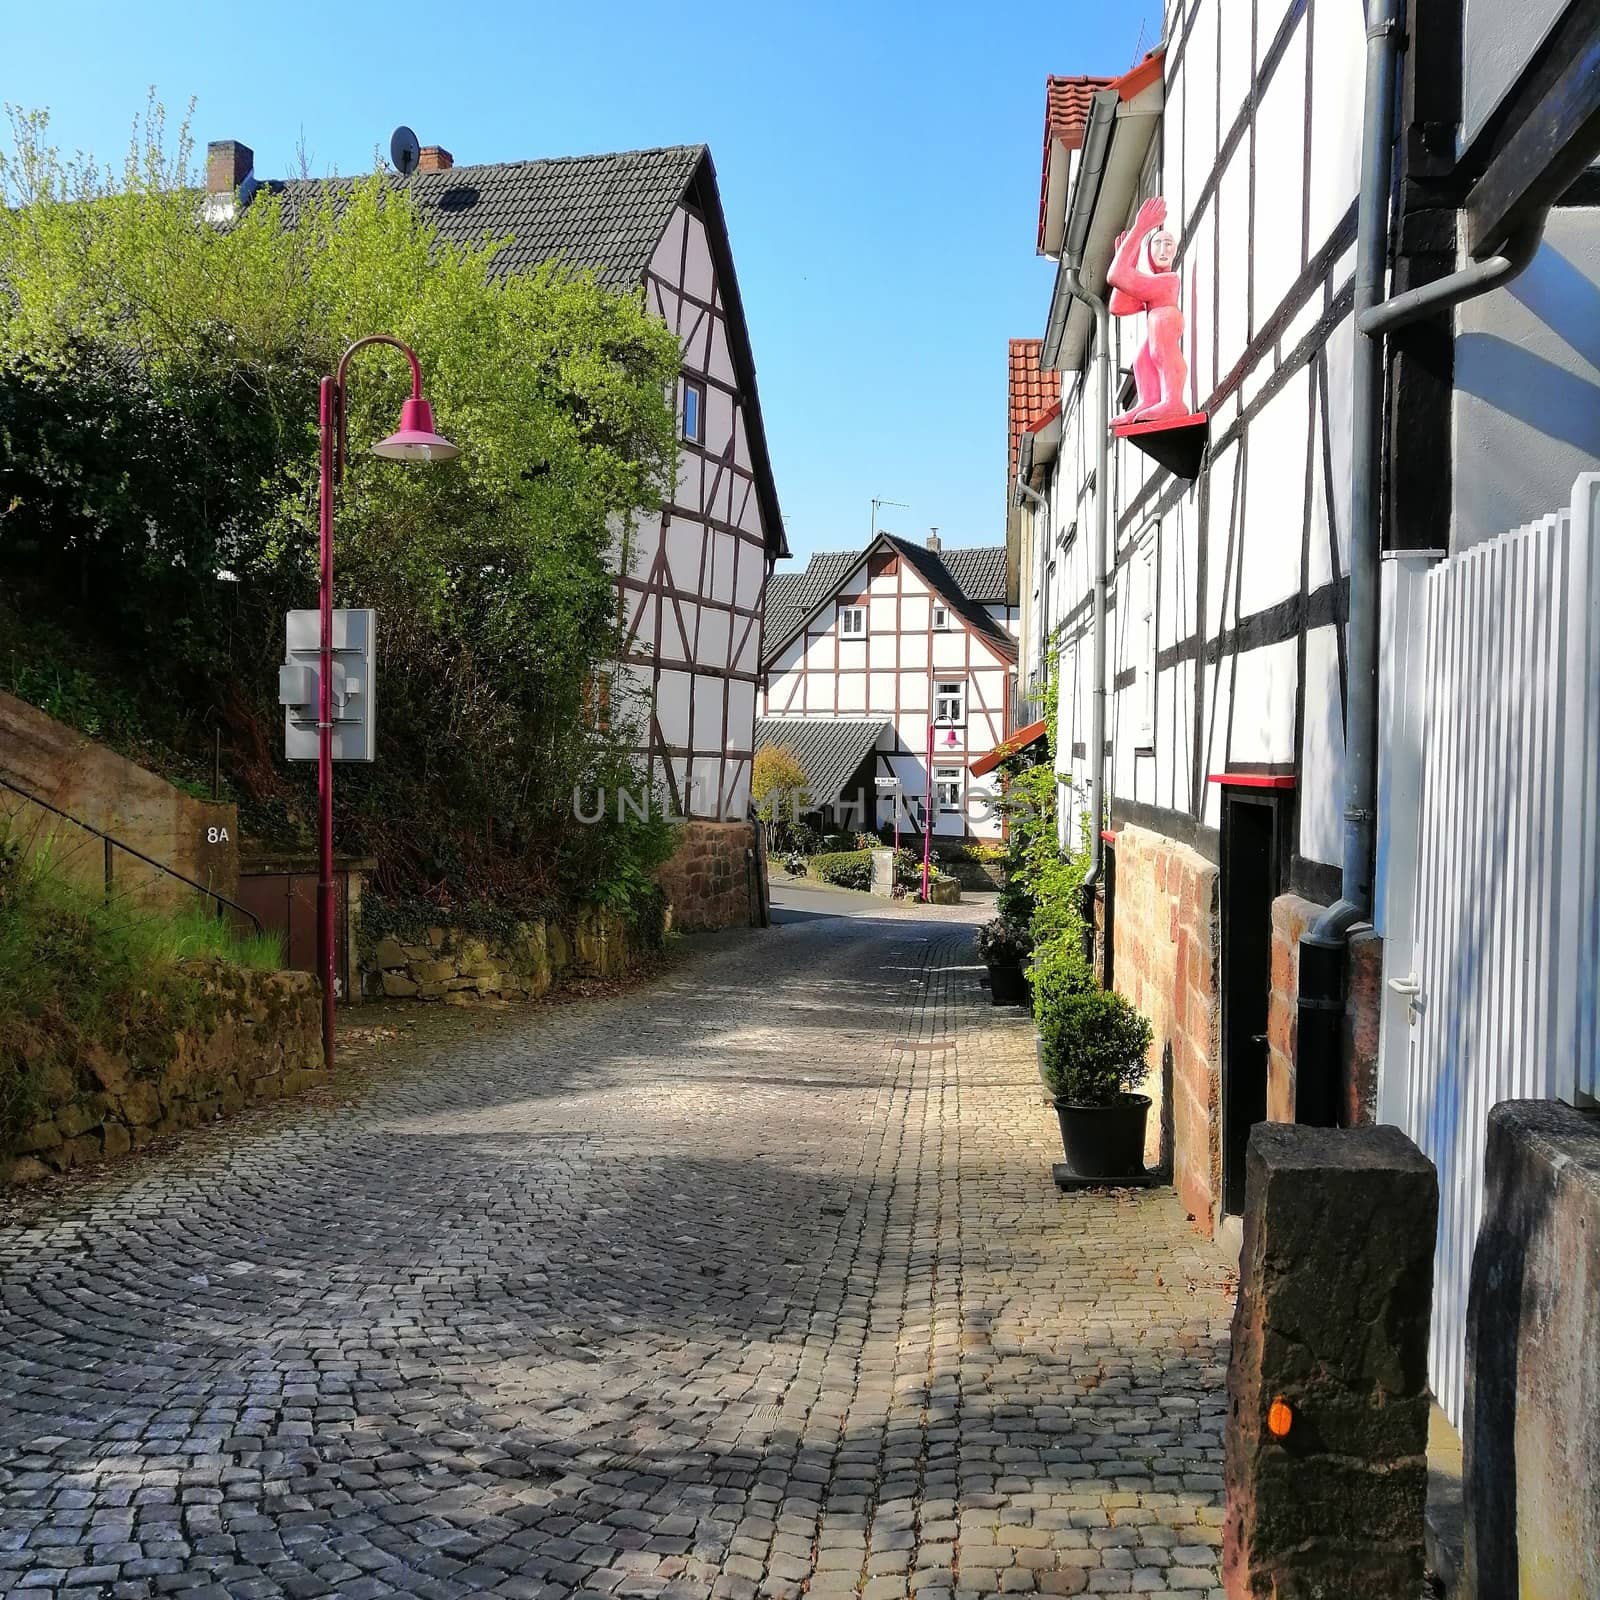 Beautiful view of historic traditional houses in old town in Europe with blue sky and clouds in summer. Kaufungen, Germany.